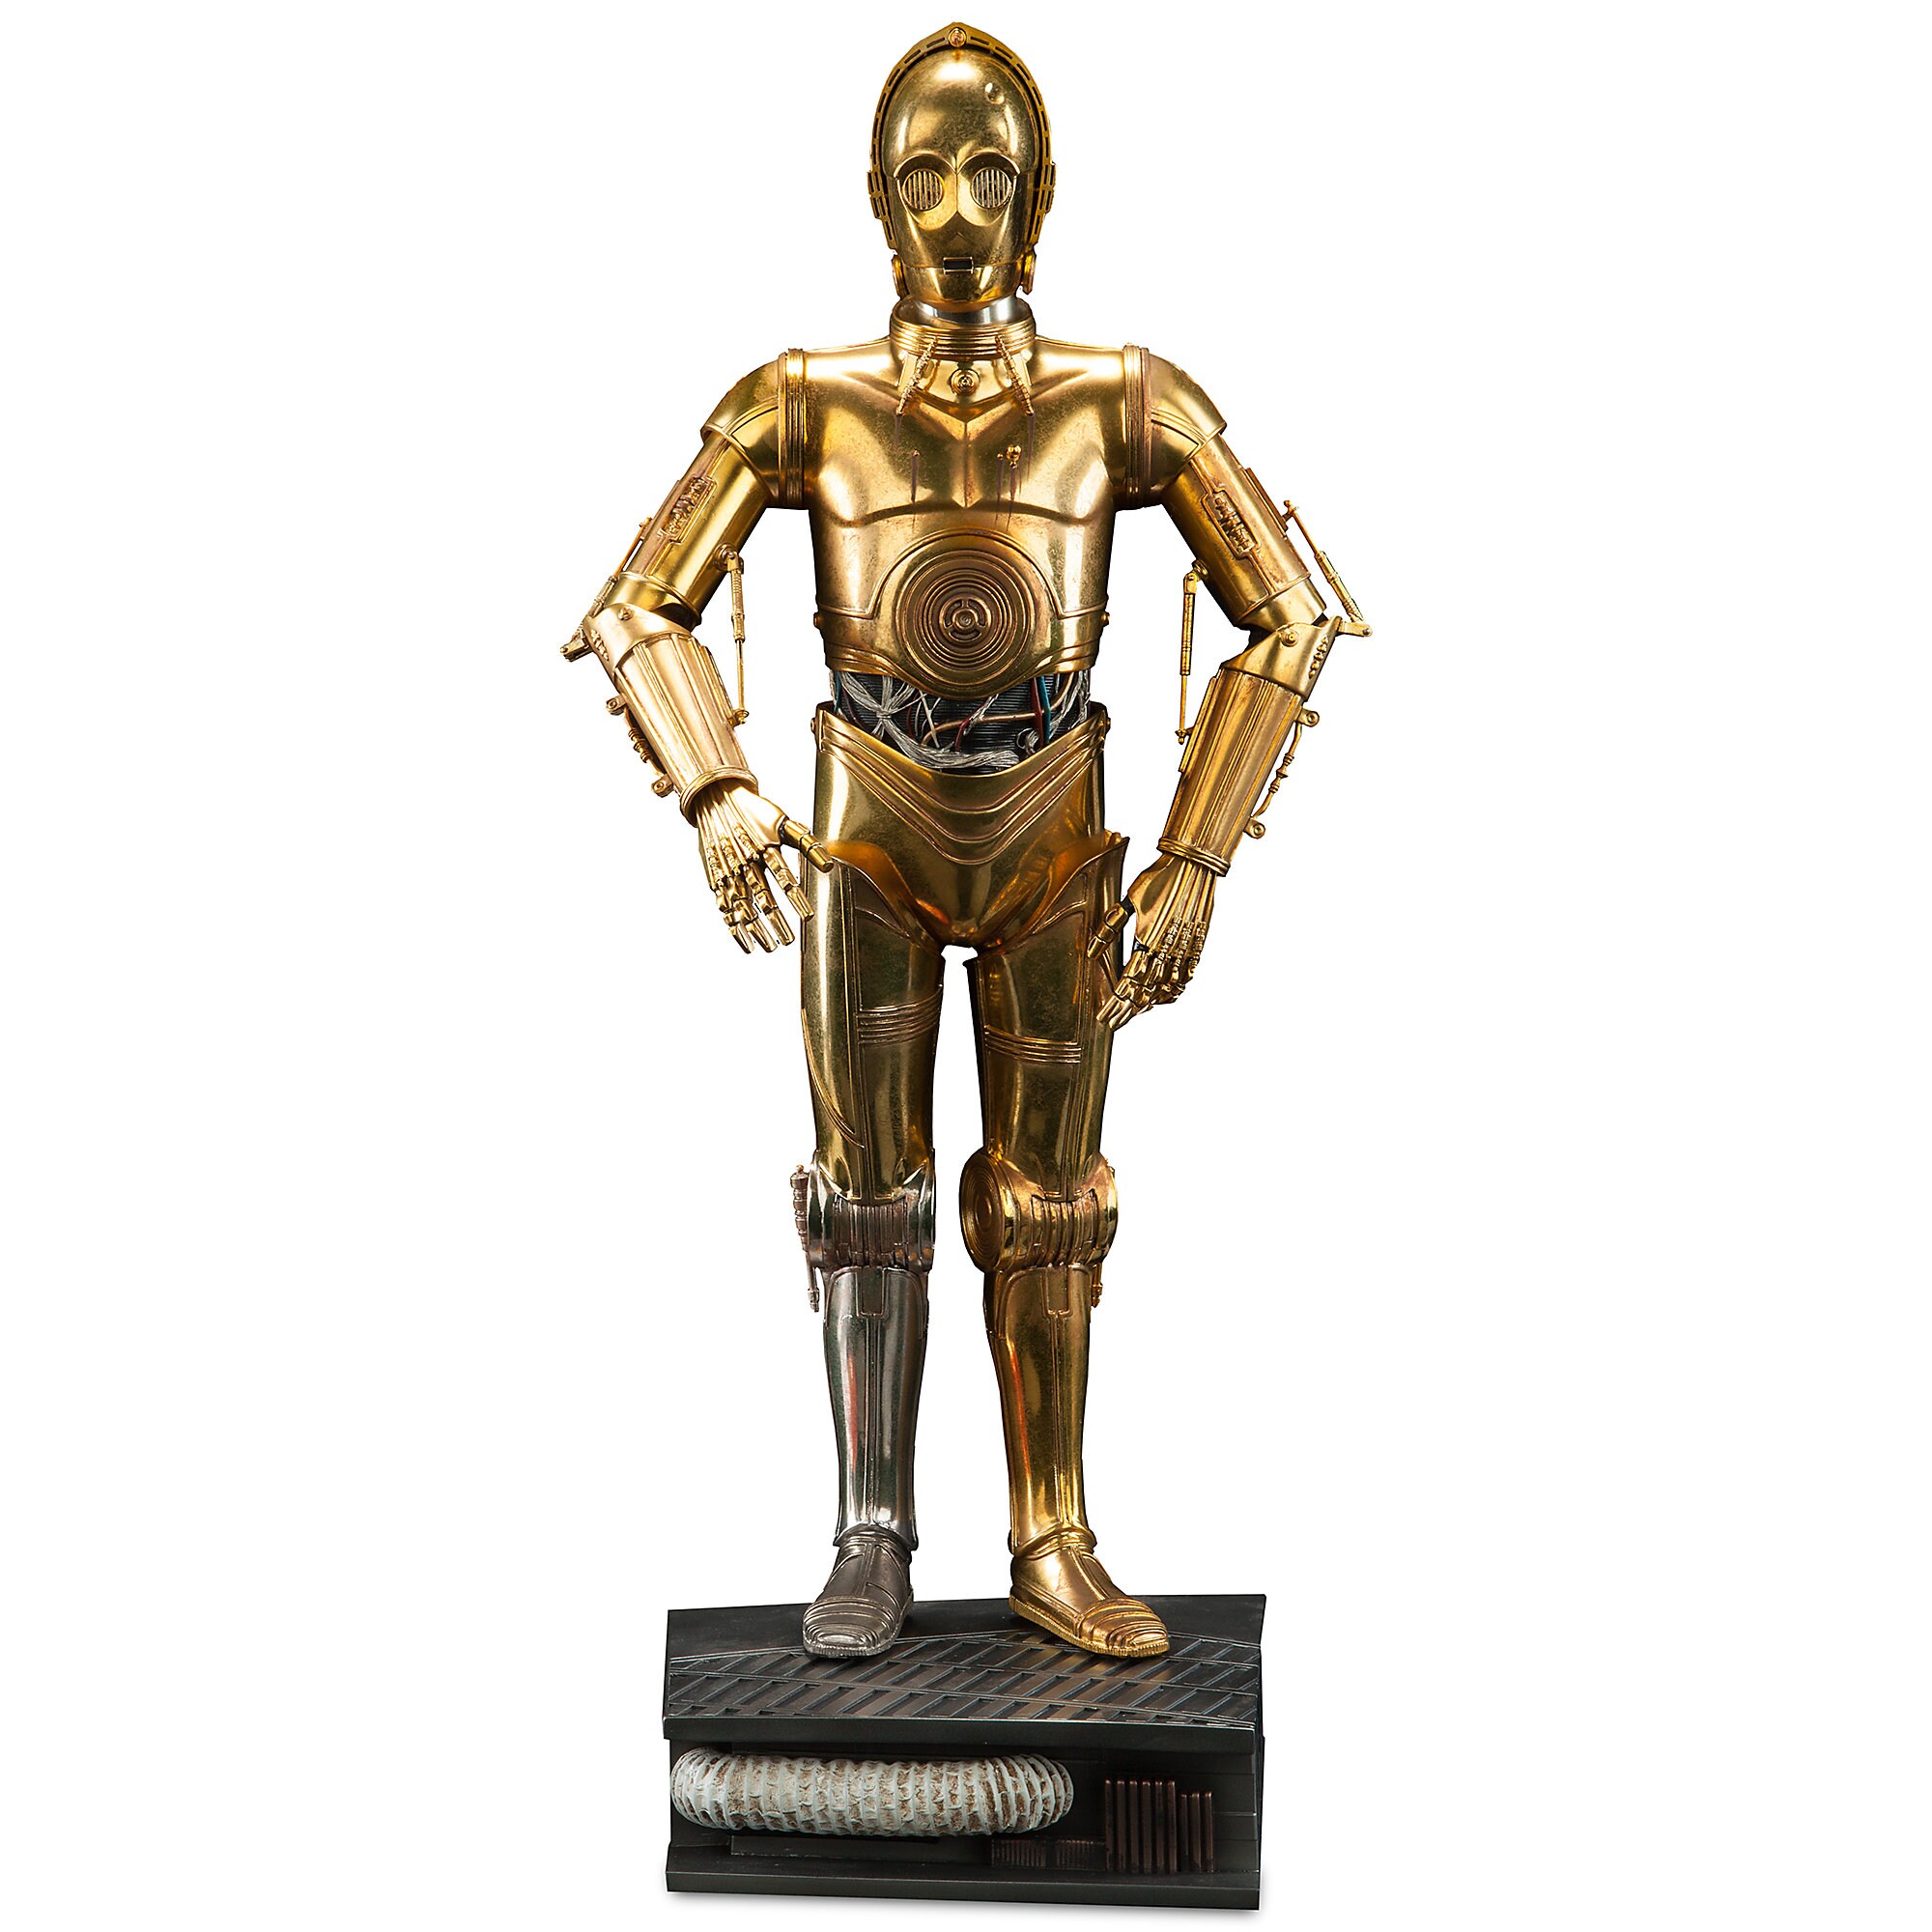 C-3PO Premium Format Figure by Sideshow Collectibles - Star Wars